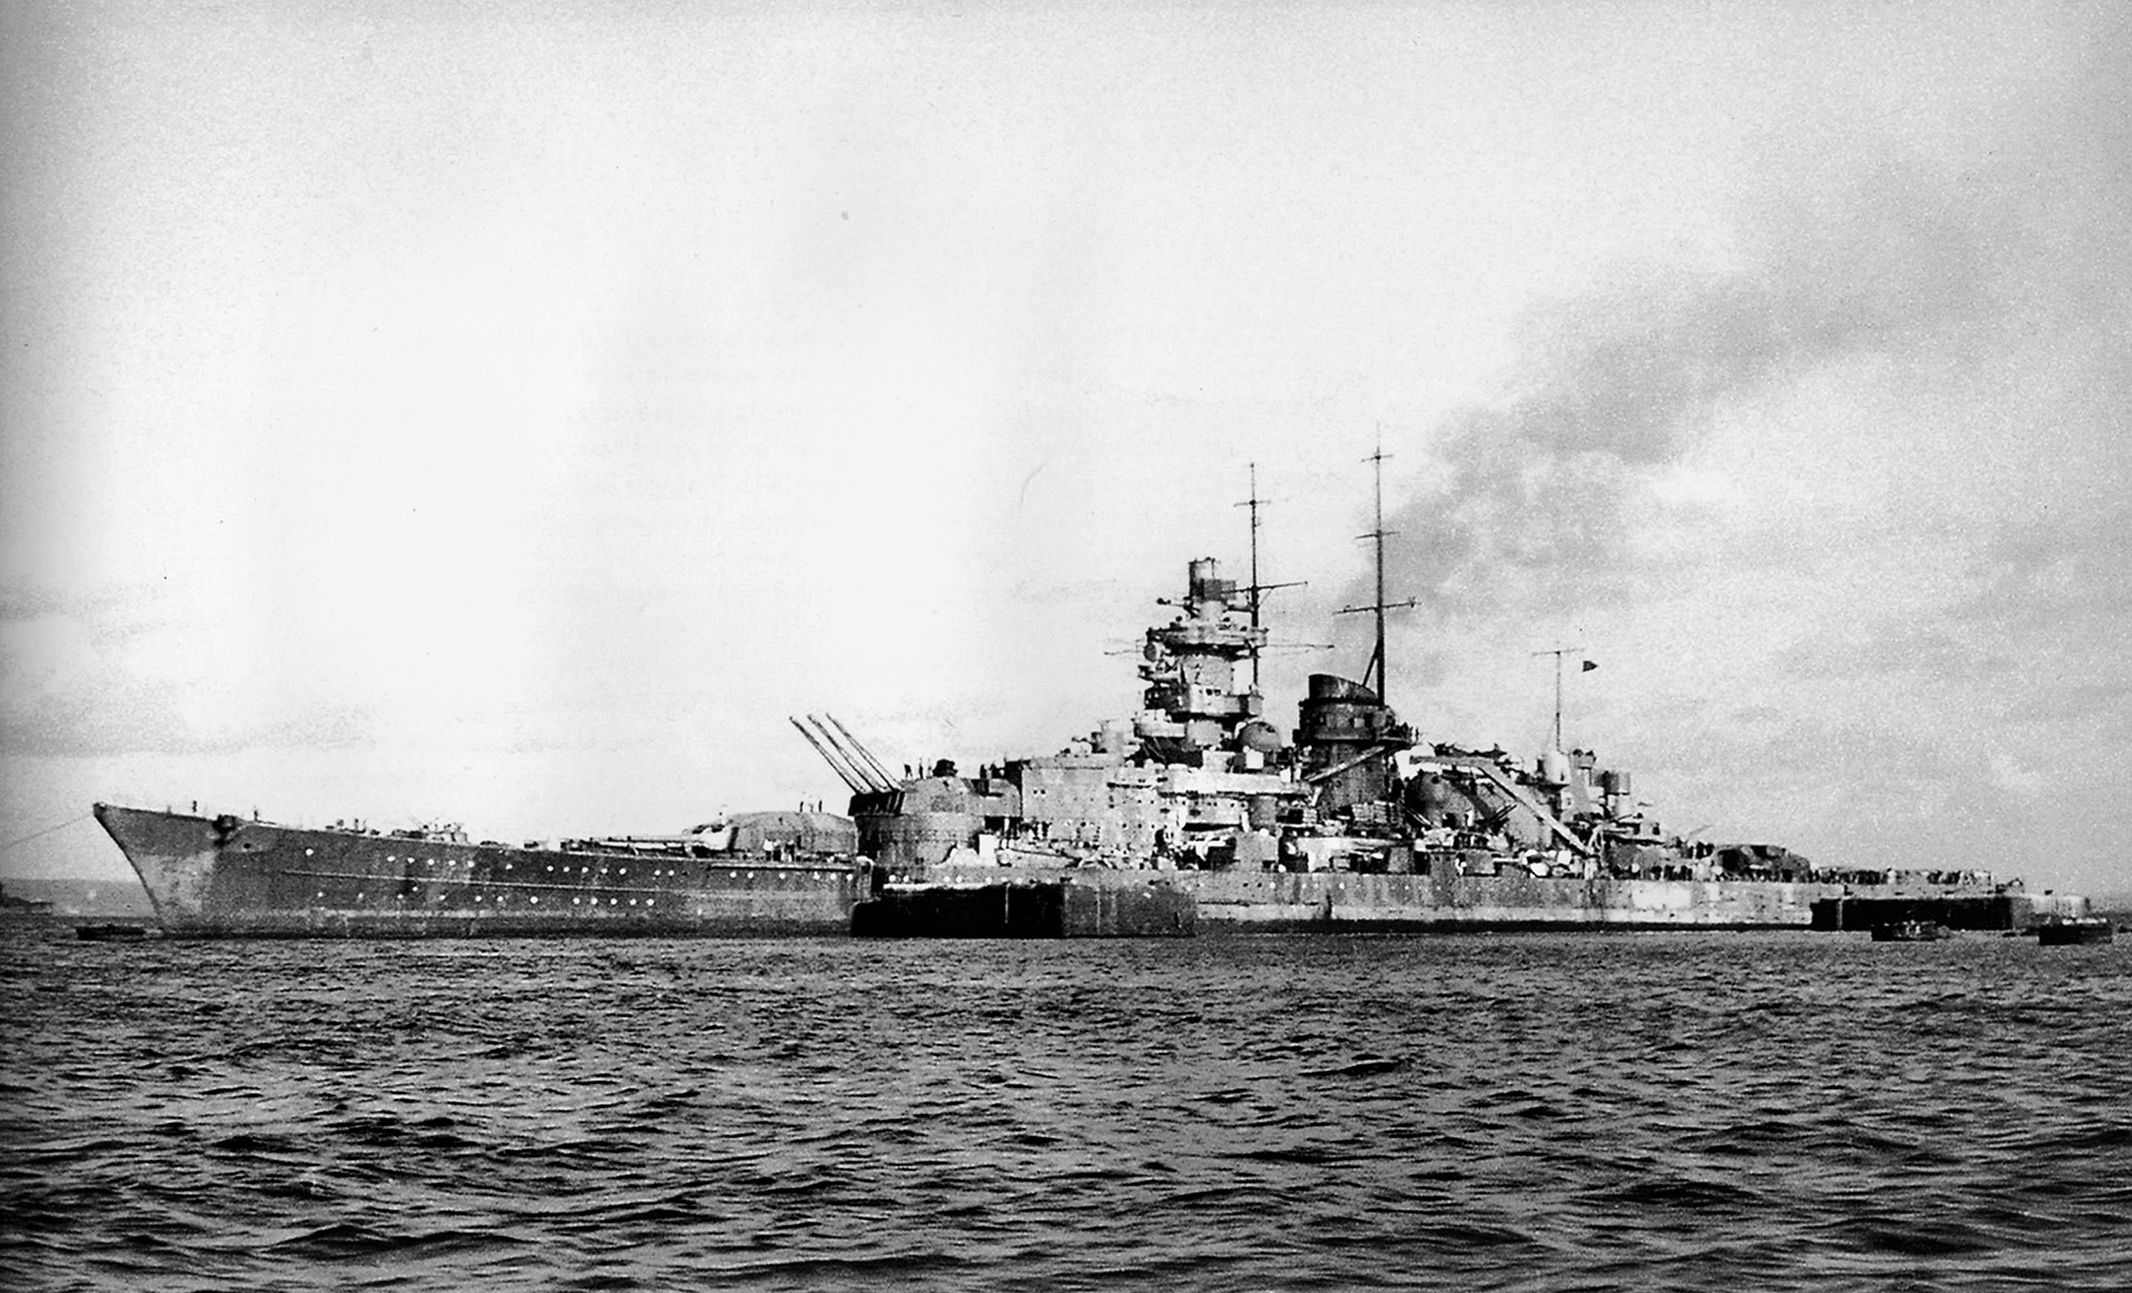 The battlecruiser Gneisenau is photographed from the deck of an escort ship returning to port in December 1941, following Operation Berlin, a mission to ravage British merchant shipping. Gneisenau was accompanied by the battlecruiser Scharnhorst during Operation Berlin and later in Operation Cerberus, the daring but successful “Channel Dash” of February 1942. 